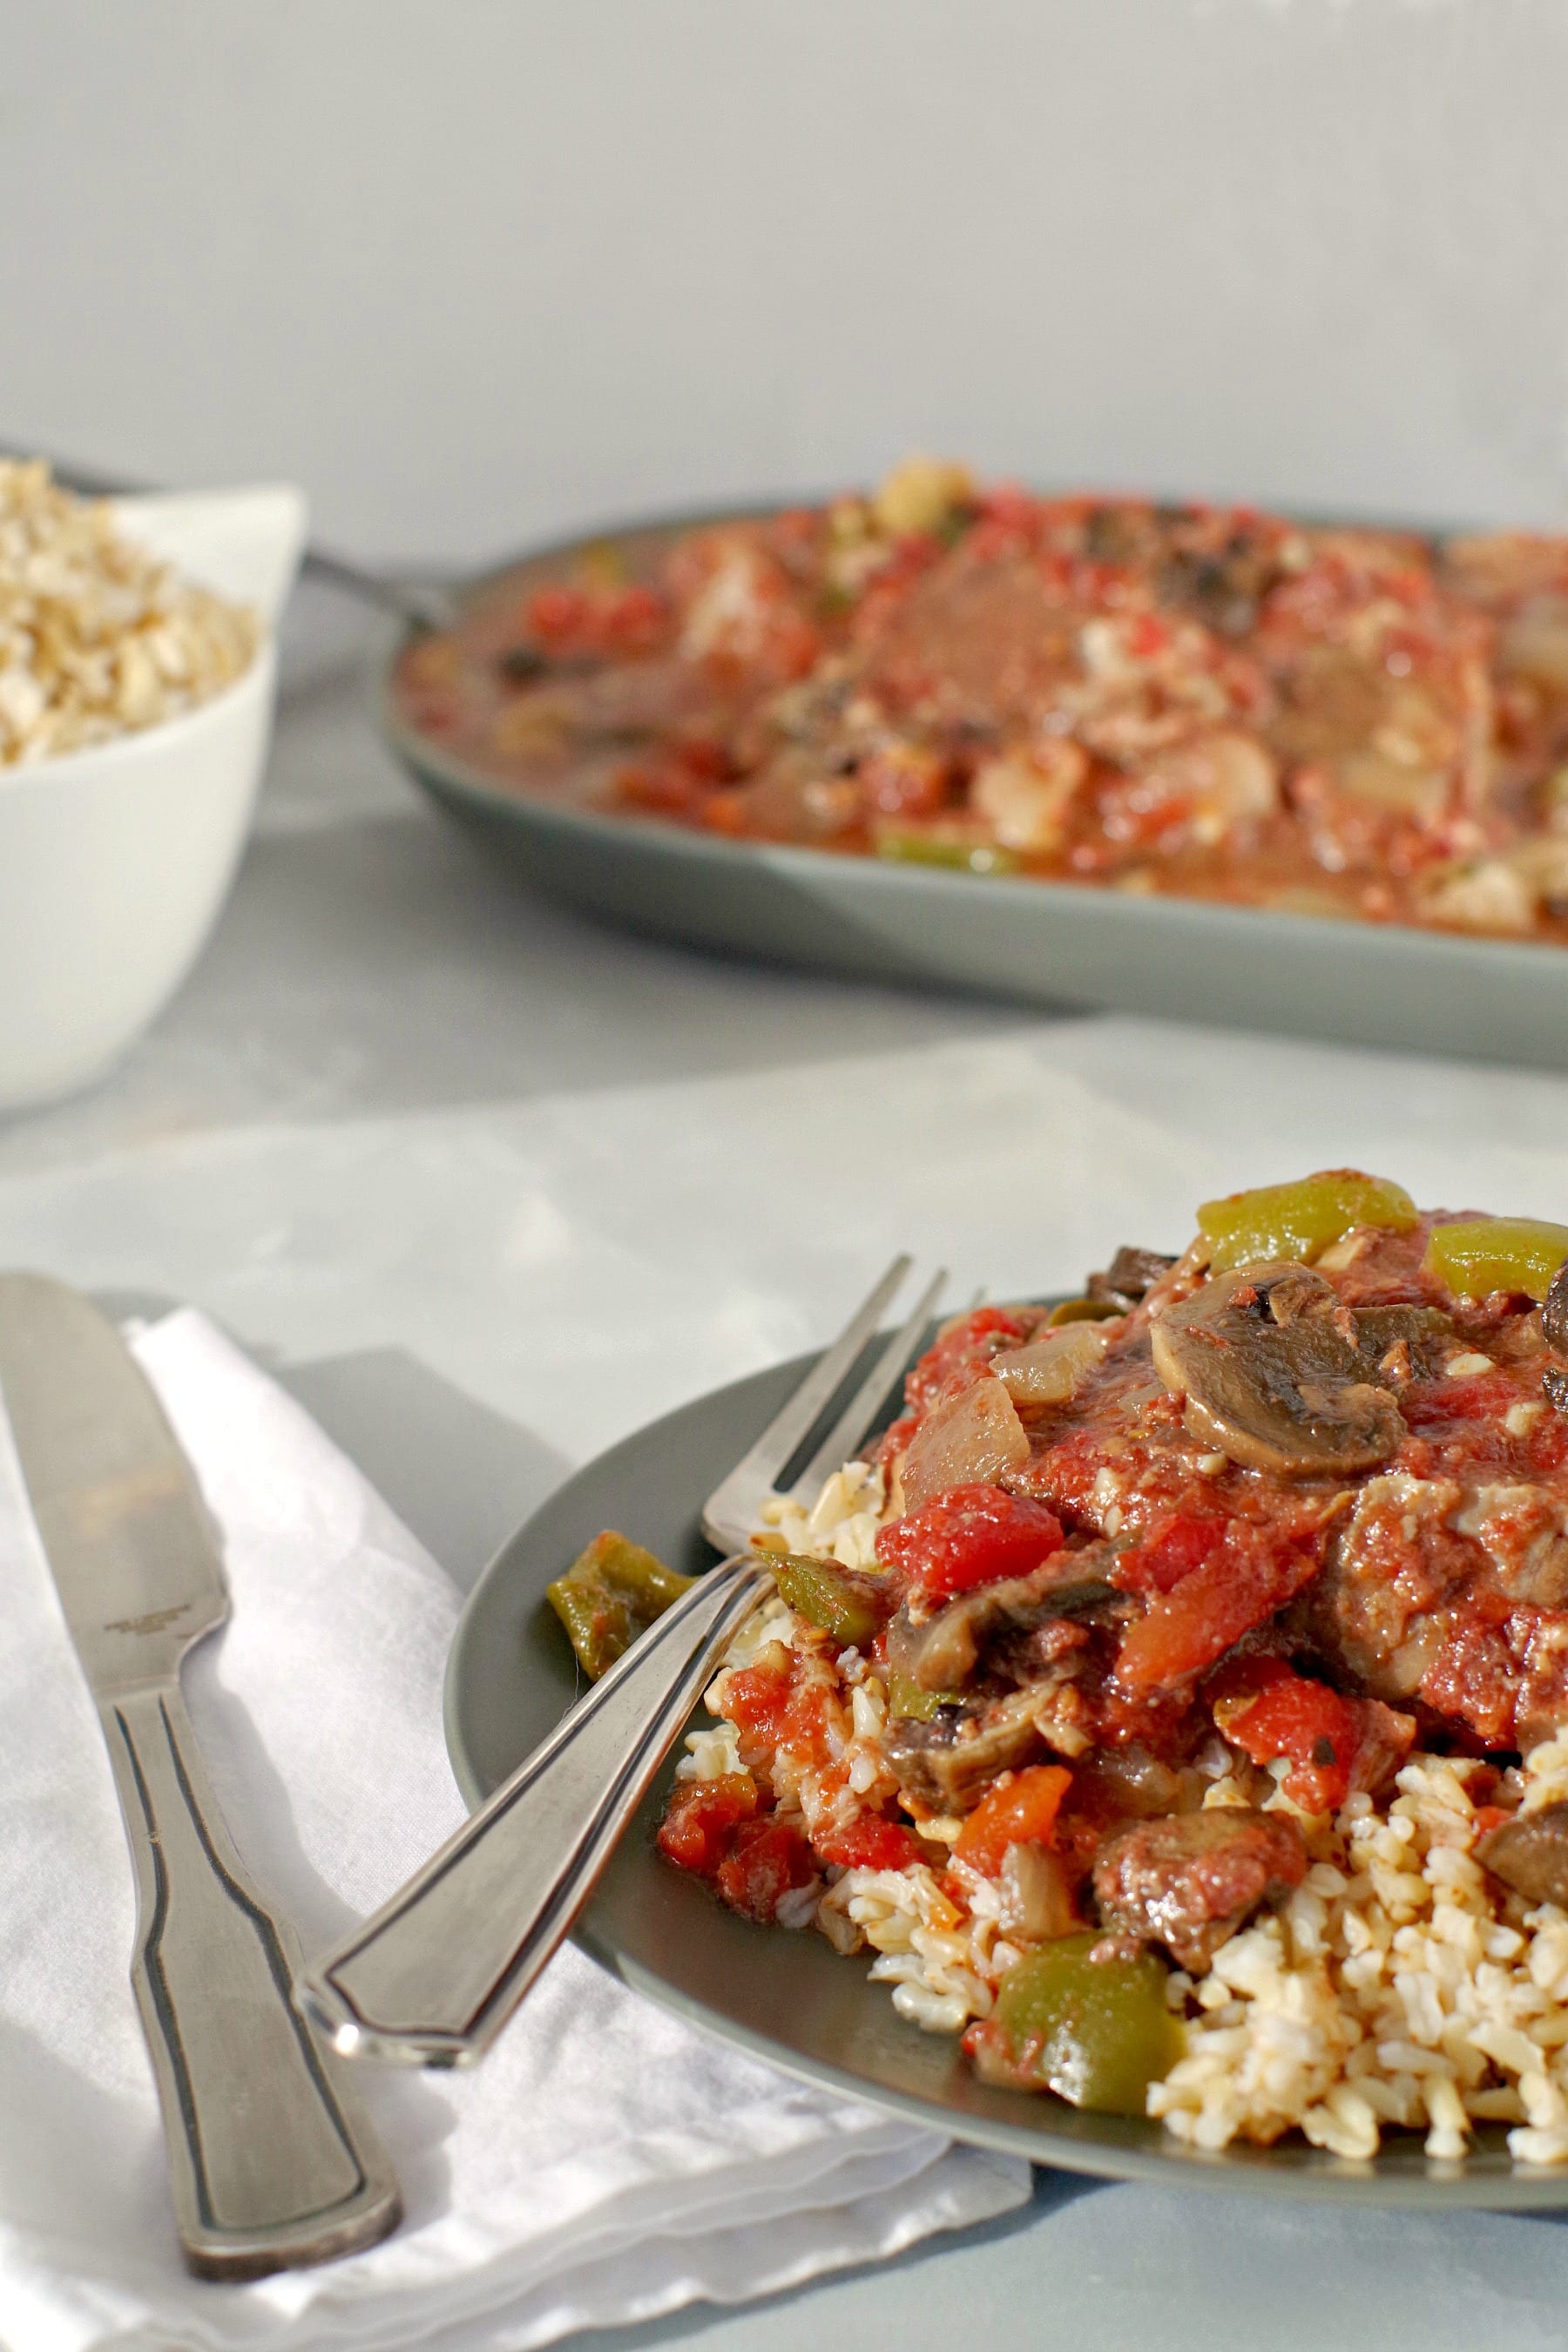 swiss steak shown topped with vegetables over rice